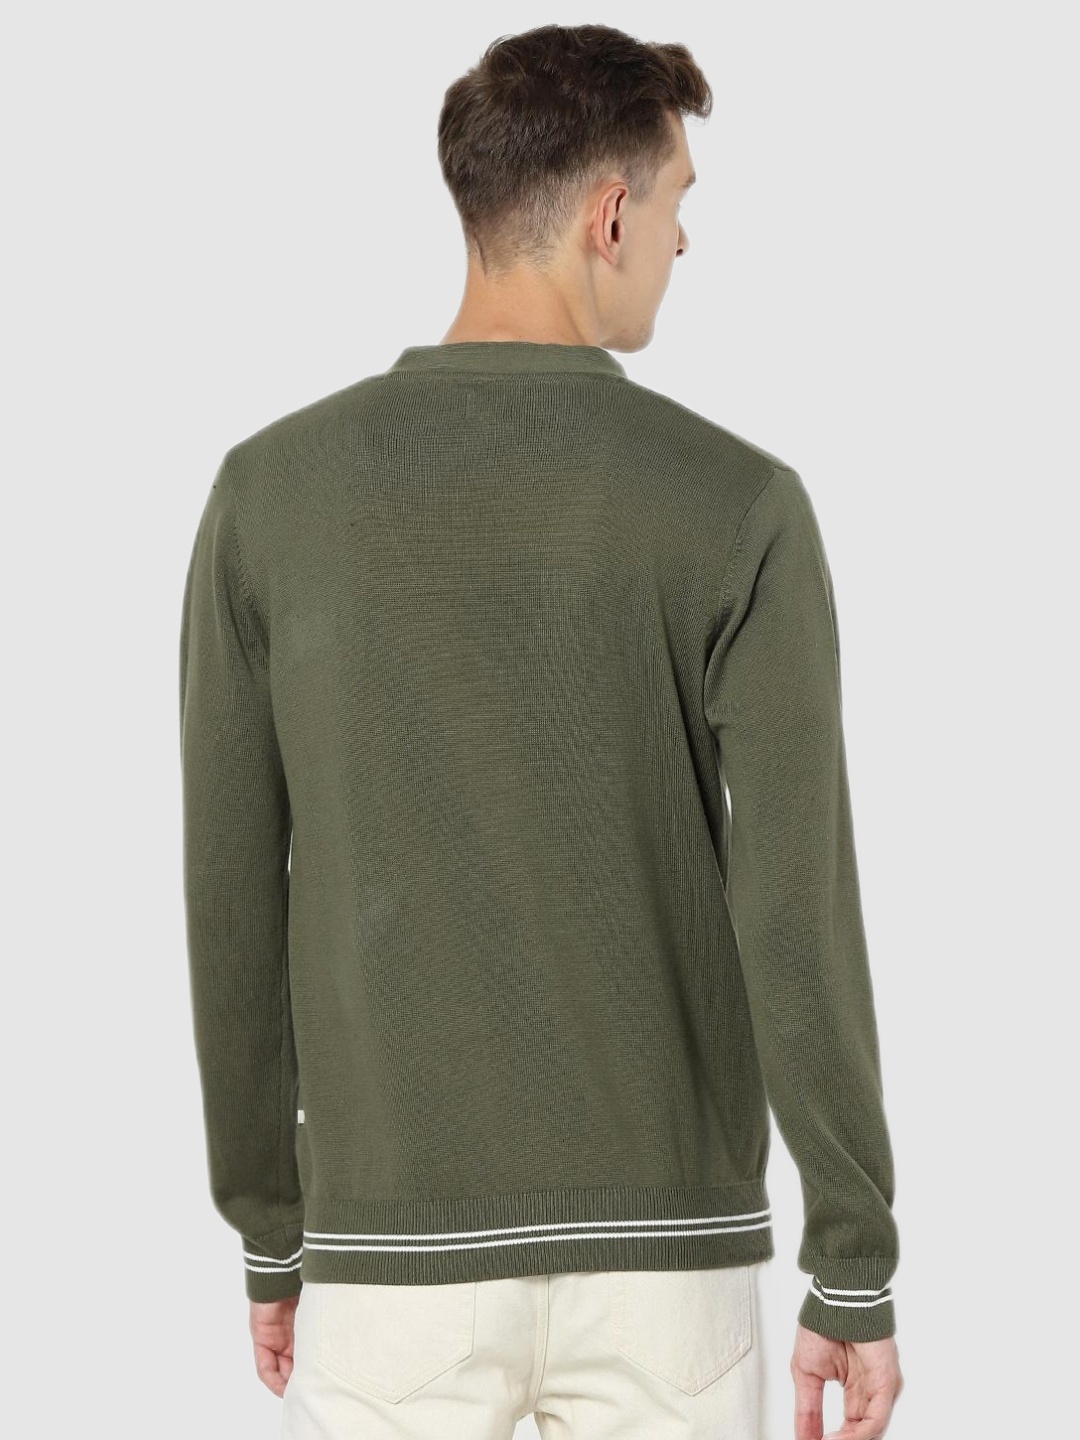 Men's Olive Green Cotton Solid Sweaters